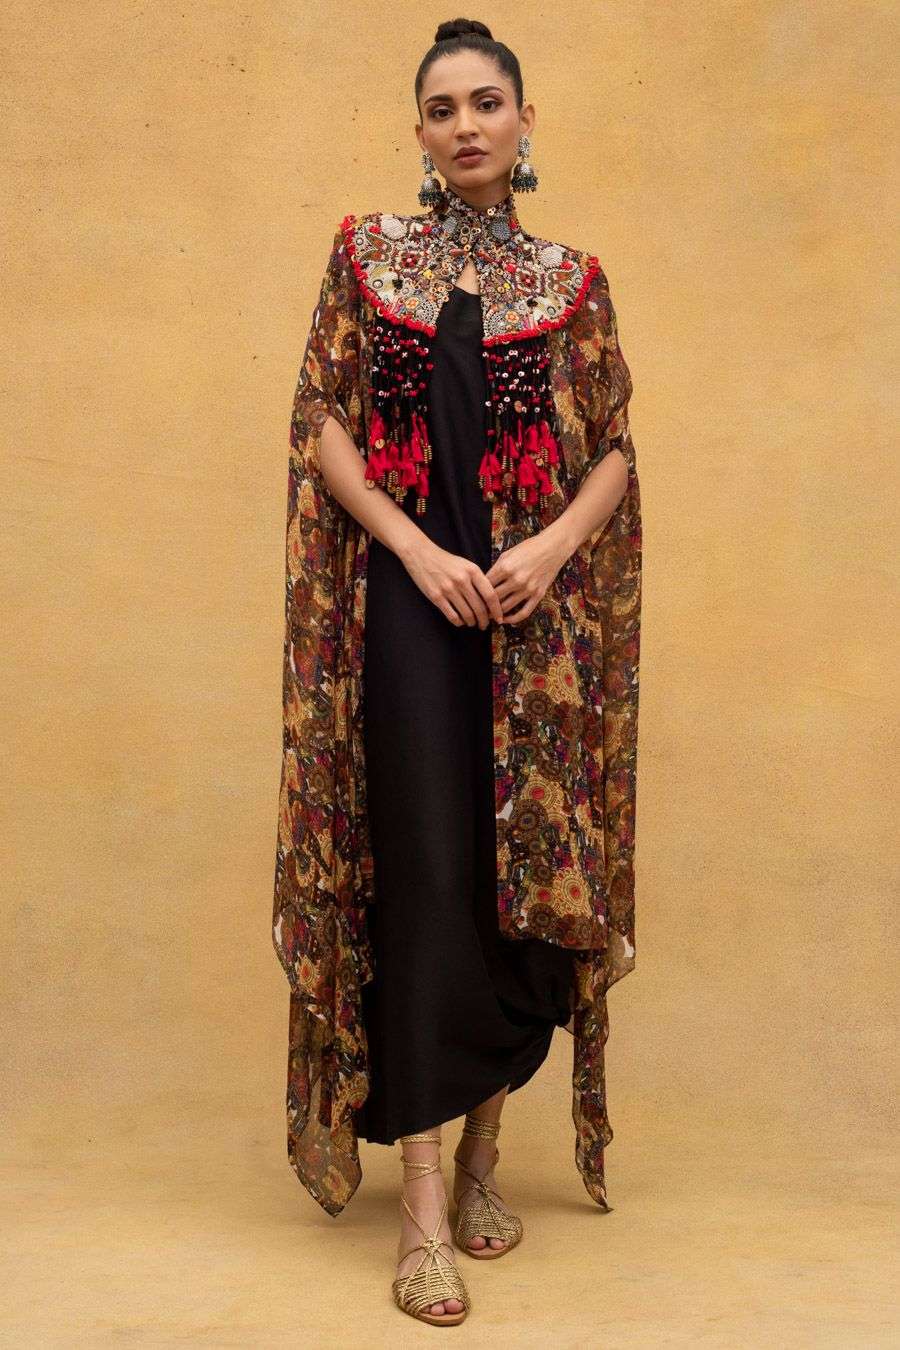 Top more than 124 cape dress ethnic latest